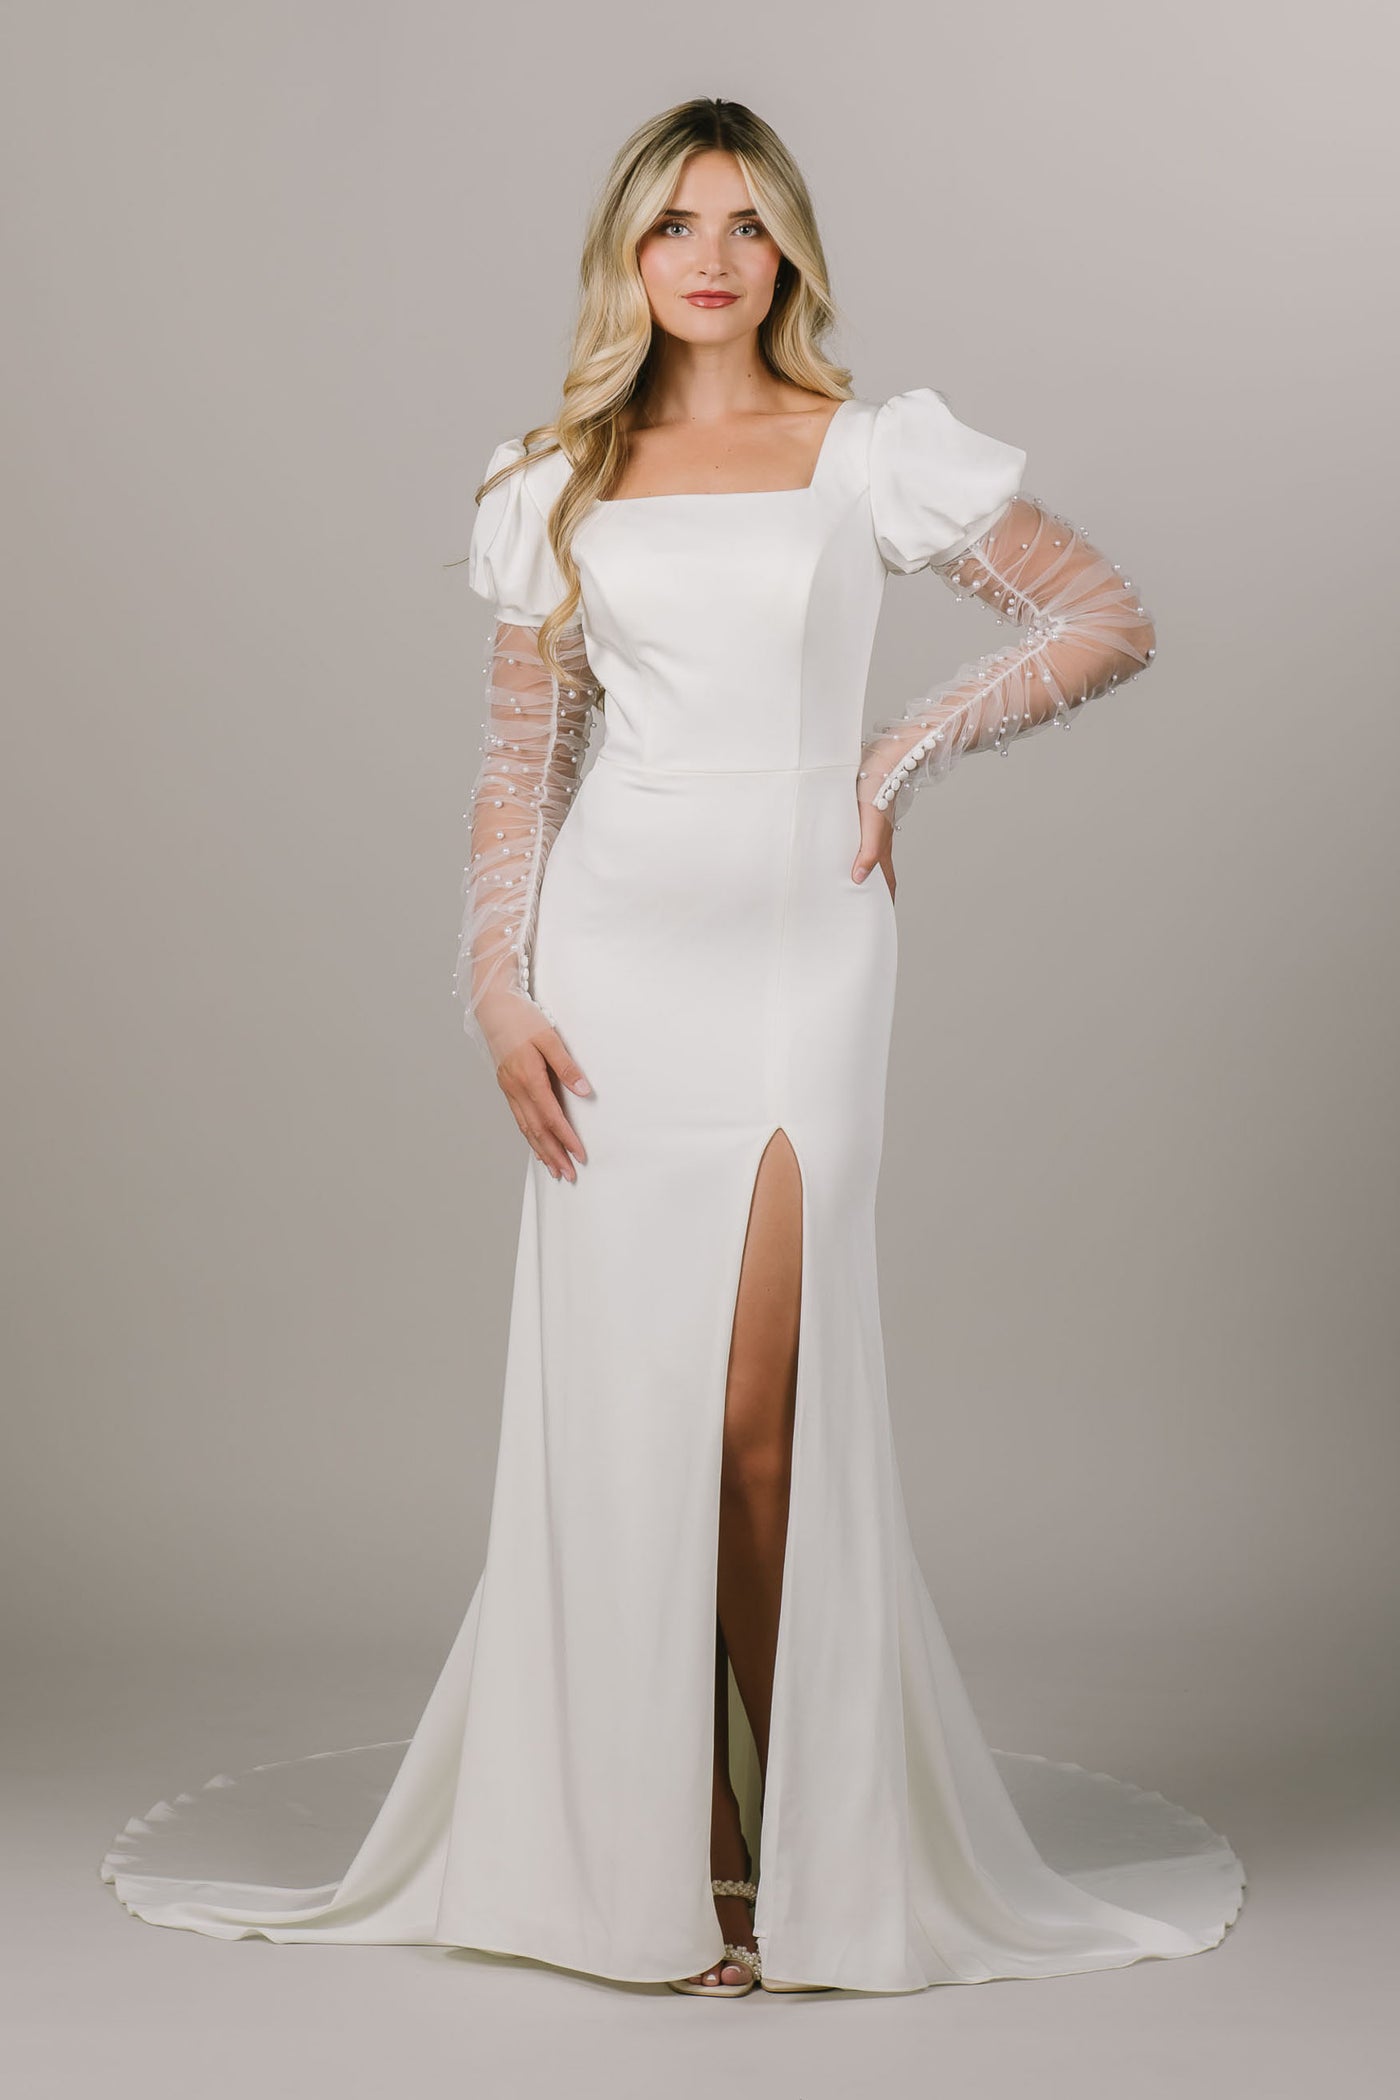 This is an alternate front shot of a modest wedding dress with a puff sleeve and detachable pearl sheer sleeves. There is also a slit in the leg leg.